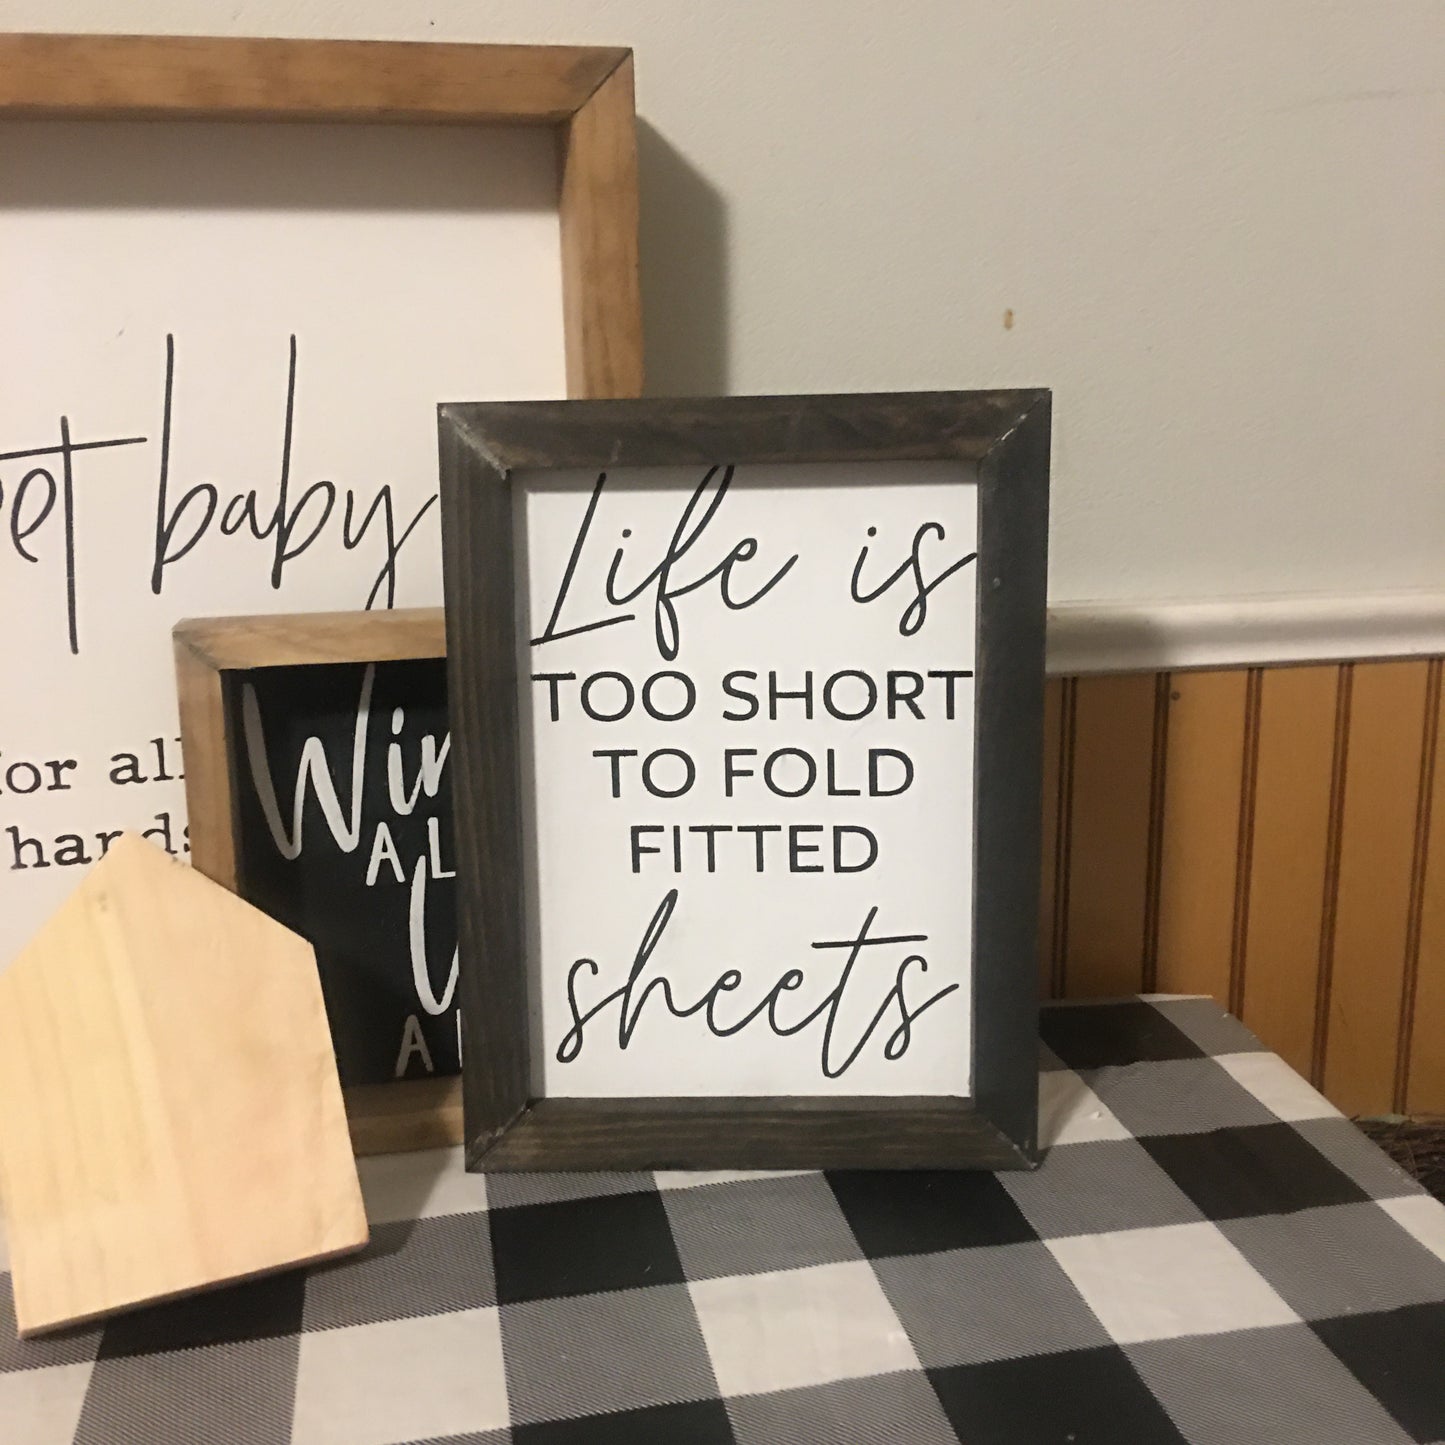 Life is too short to fold fitted sheets